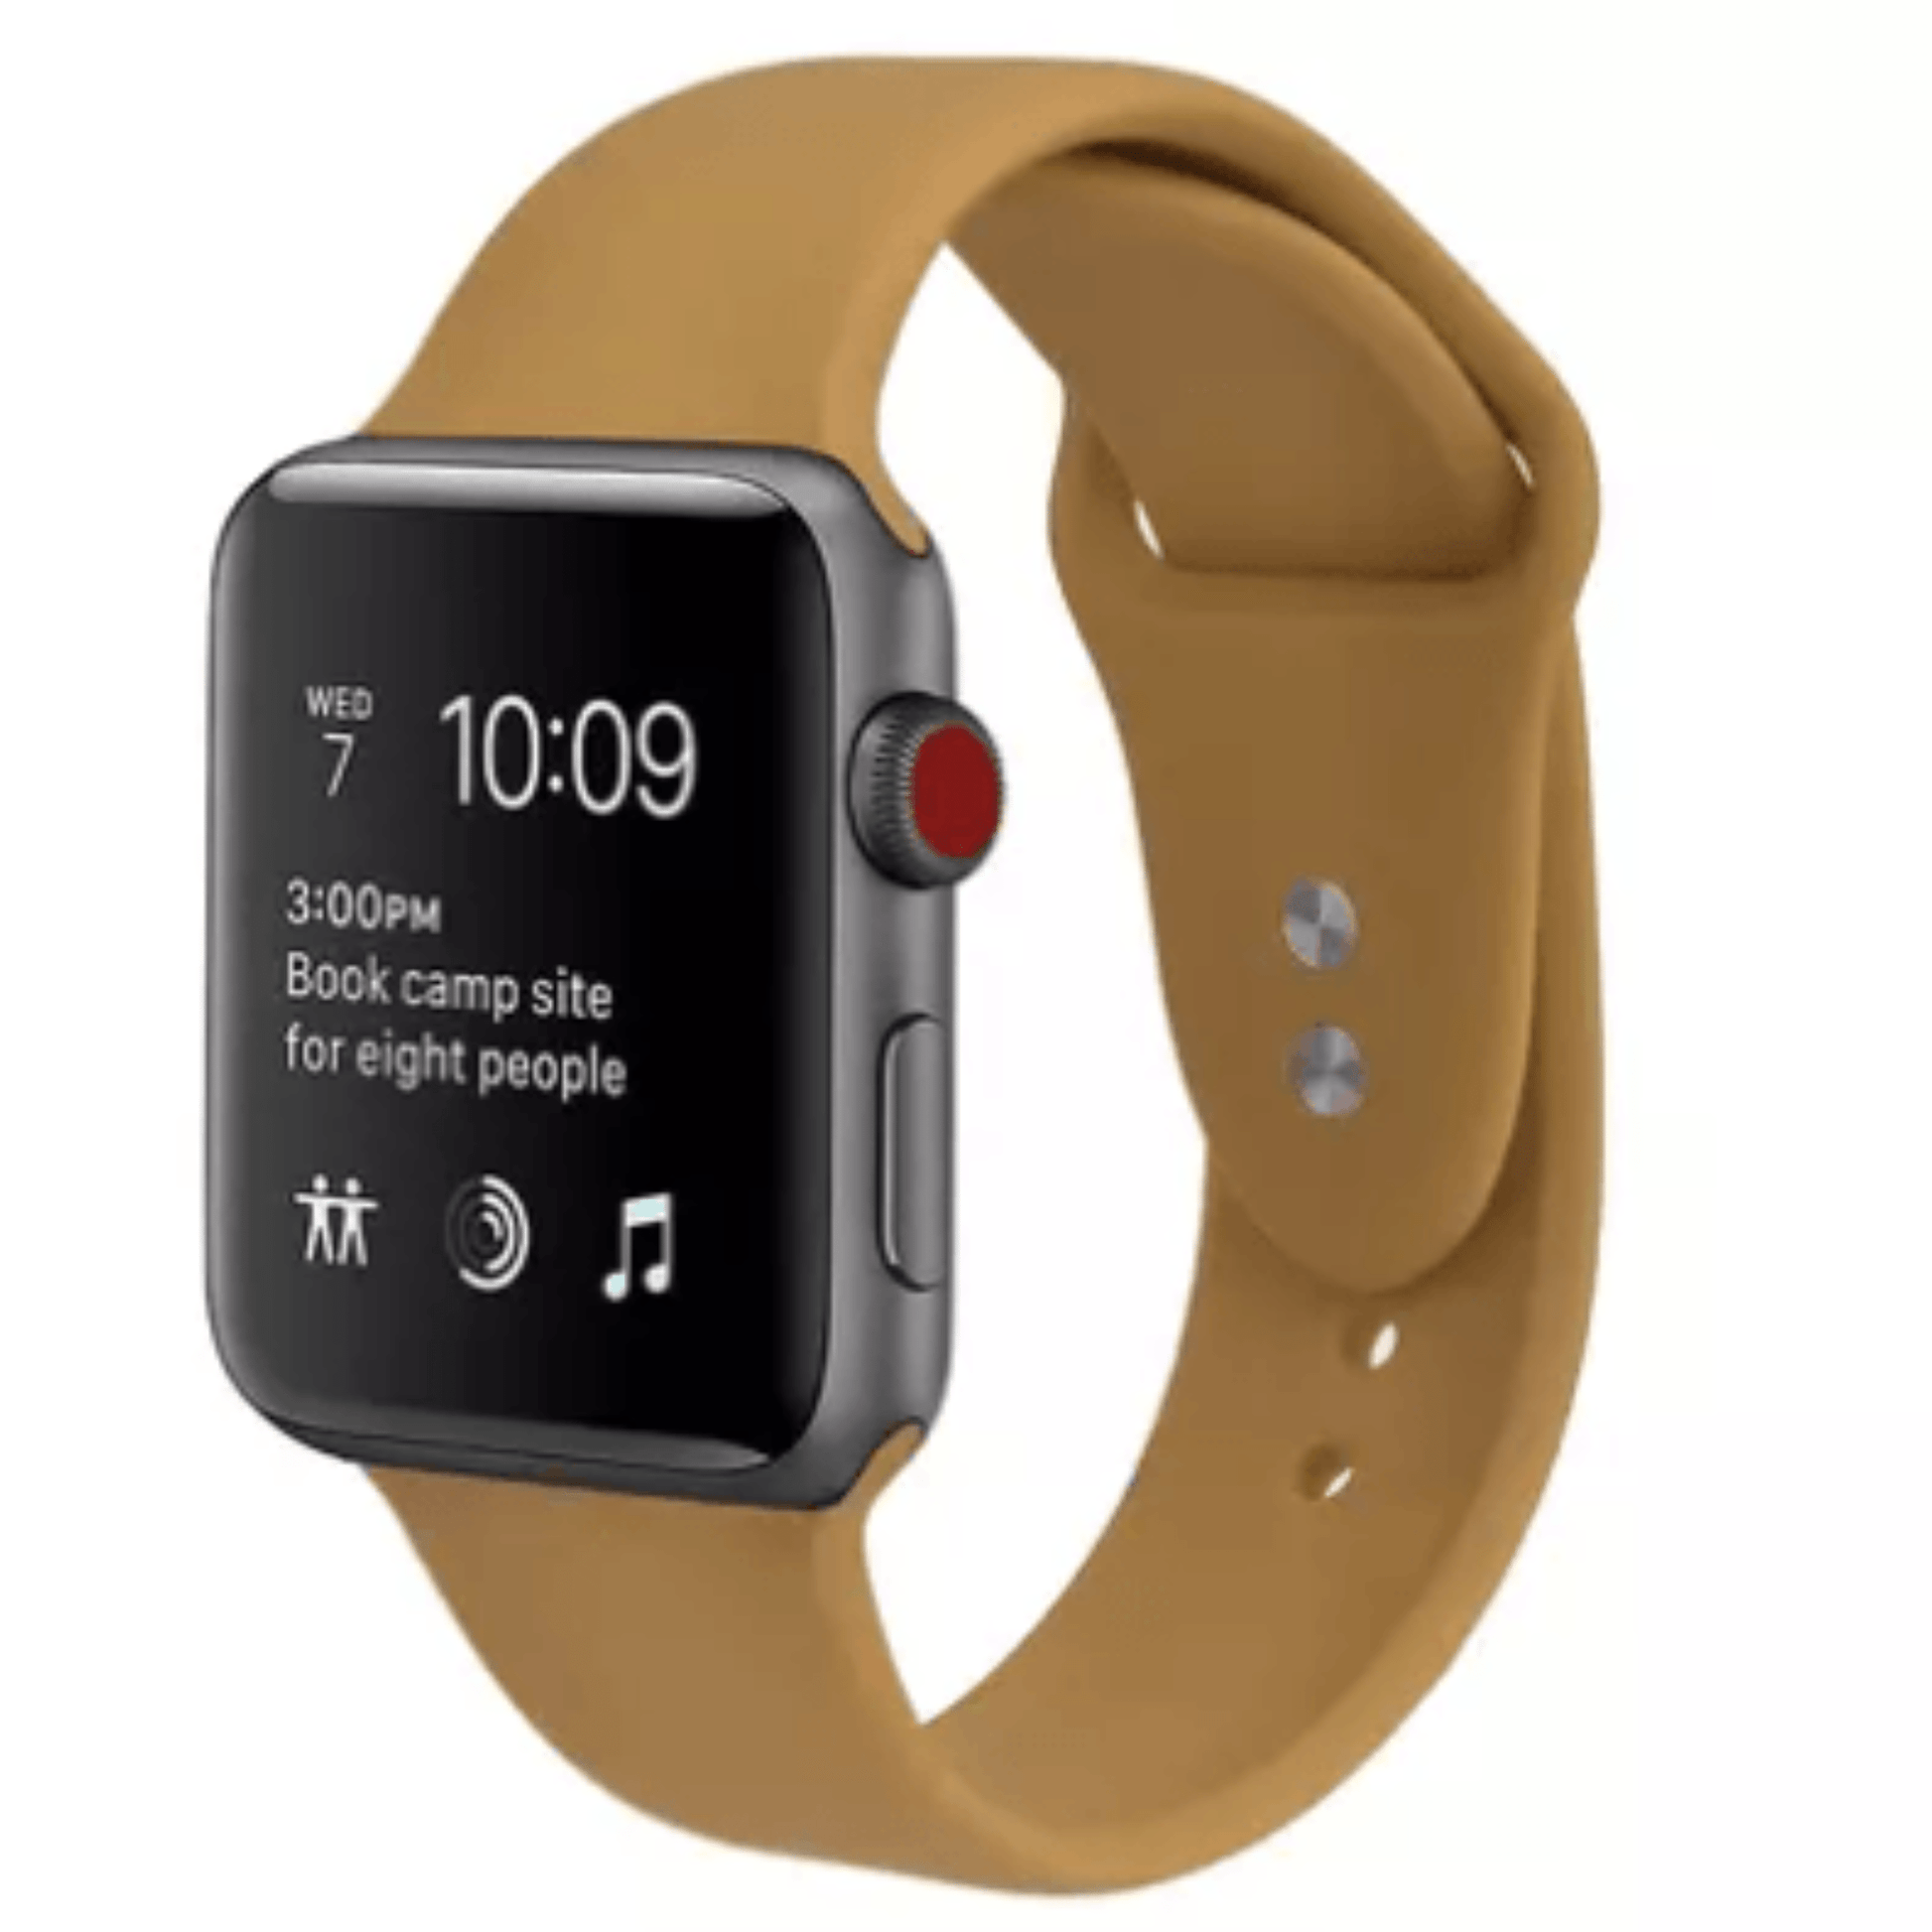 Silicone Sport Replacement Band for Apple Watch Walnut Beige Apple Watch Band Elements Watches